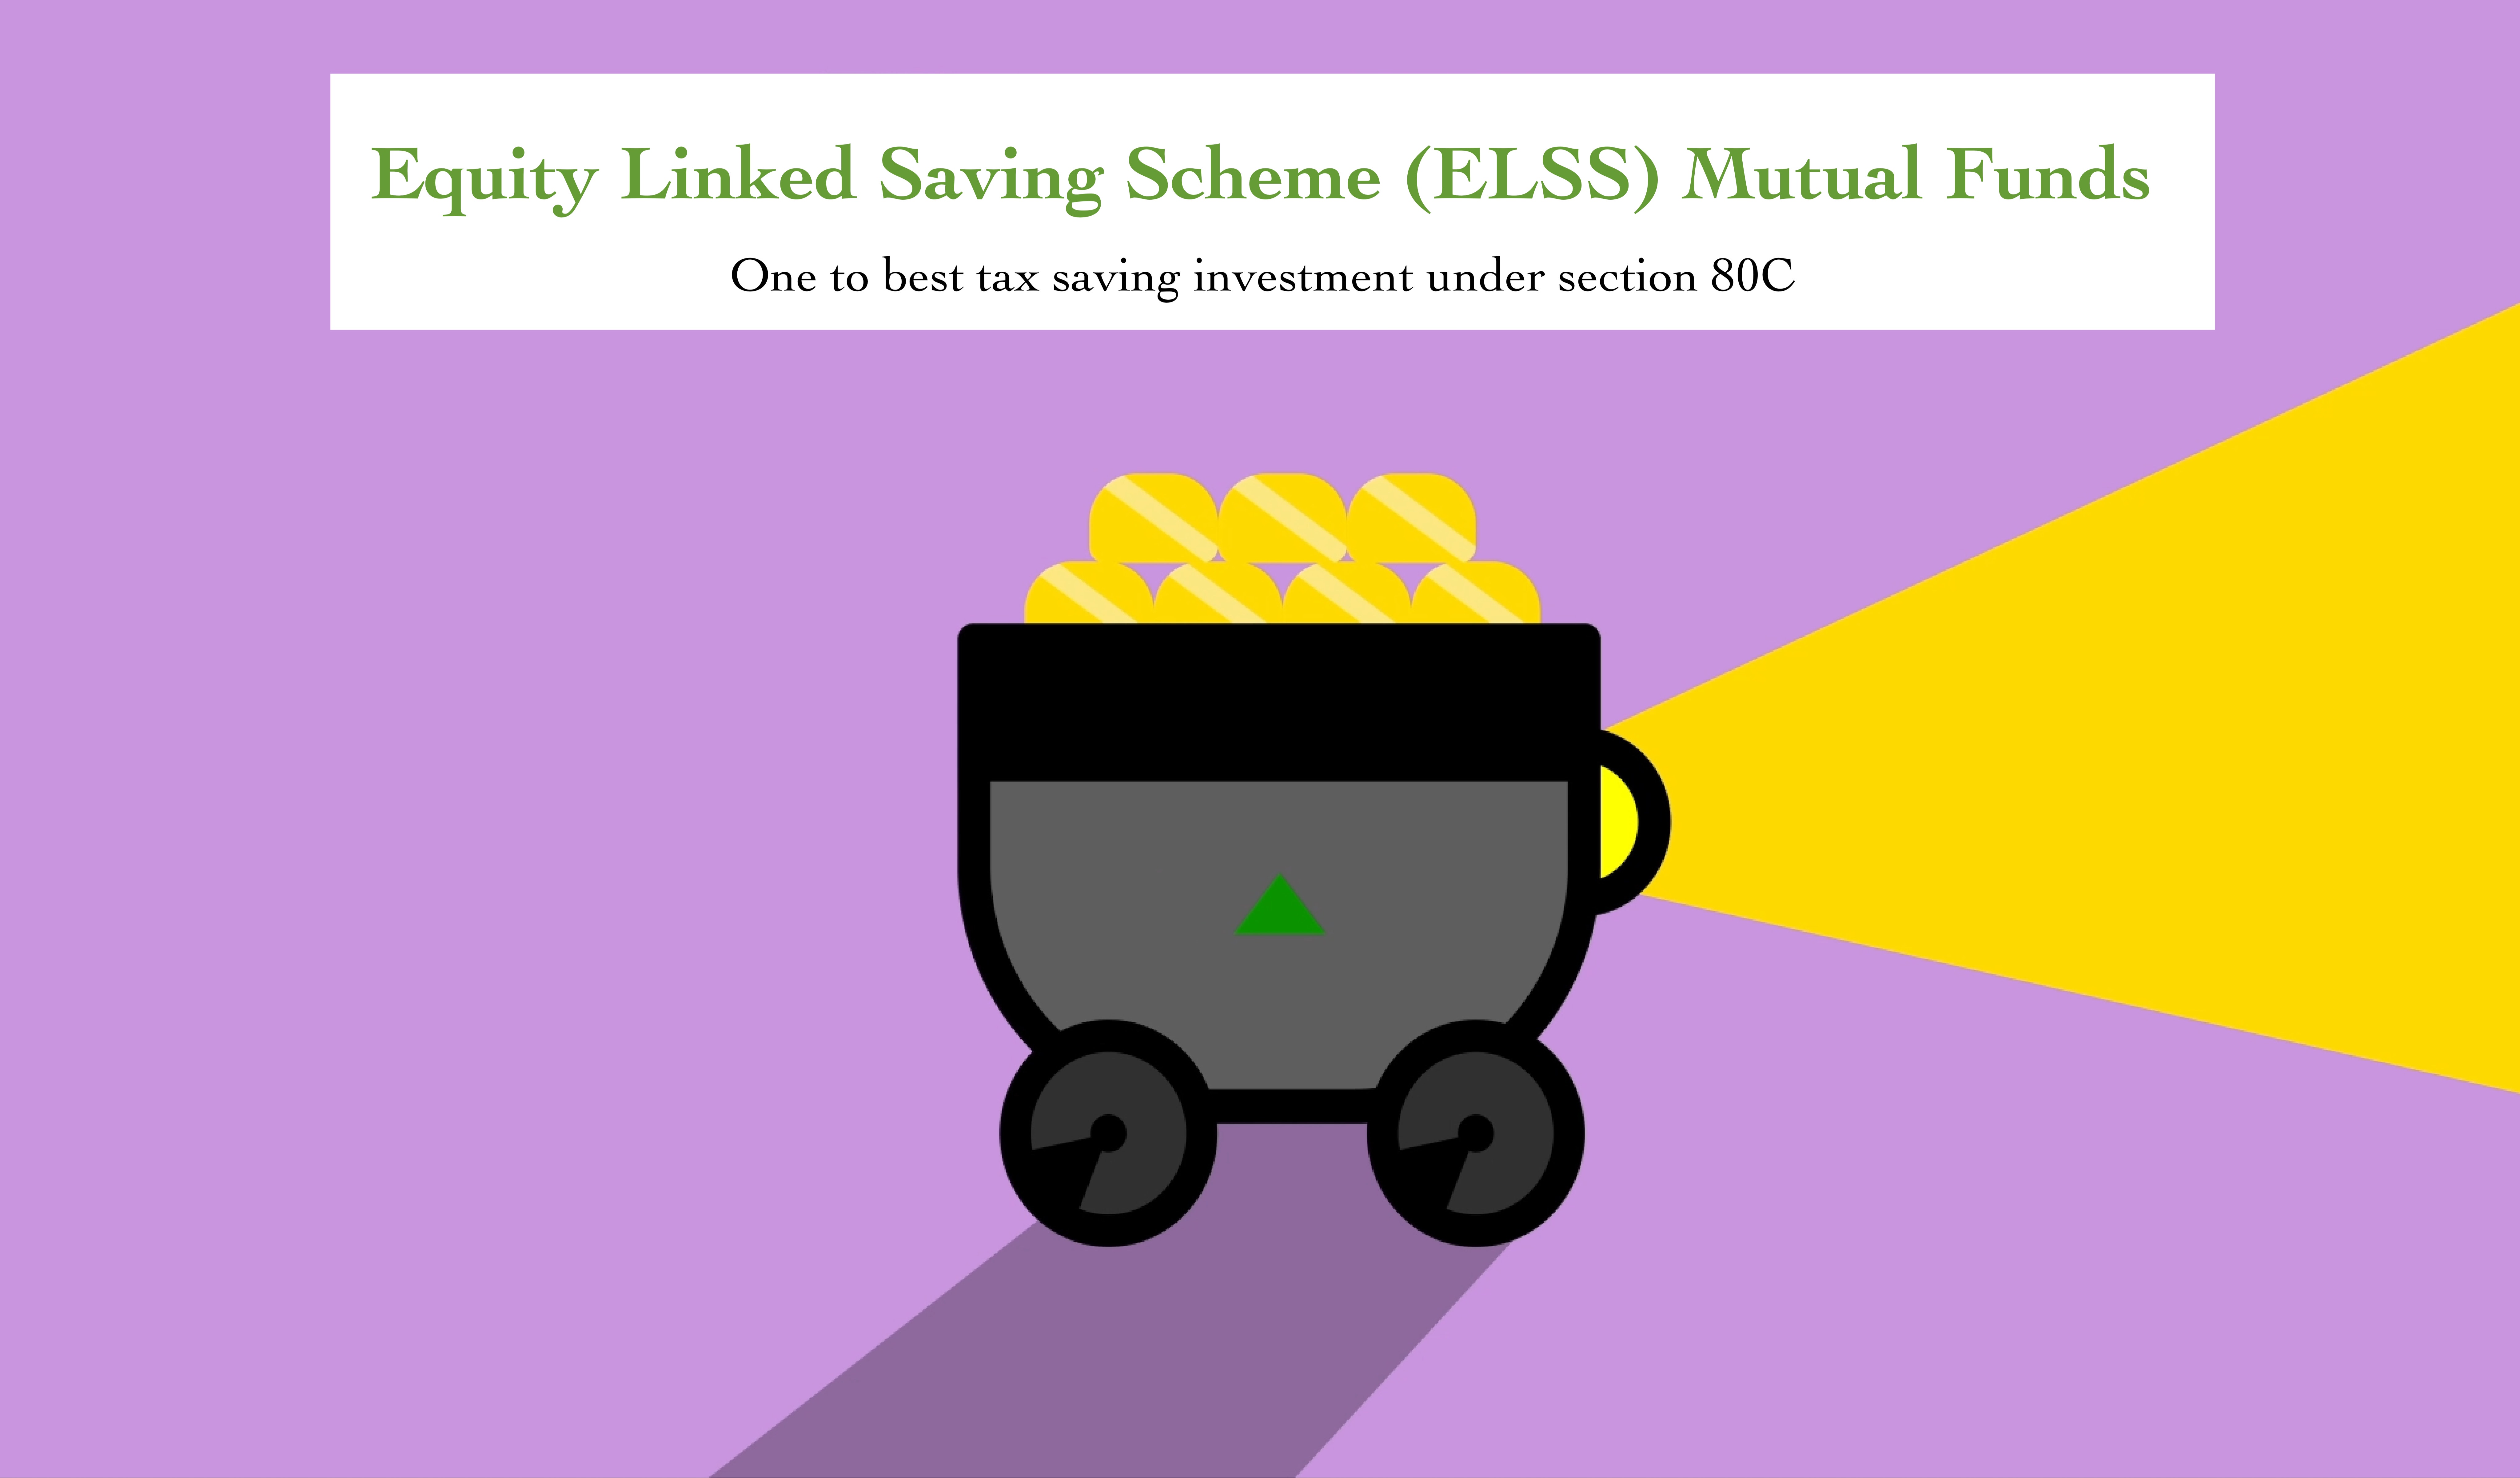 Equity Linked Saving Scheme or ELSS funds - tax saving fund